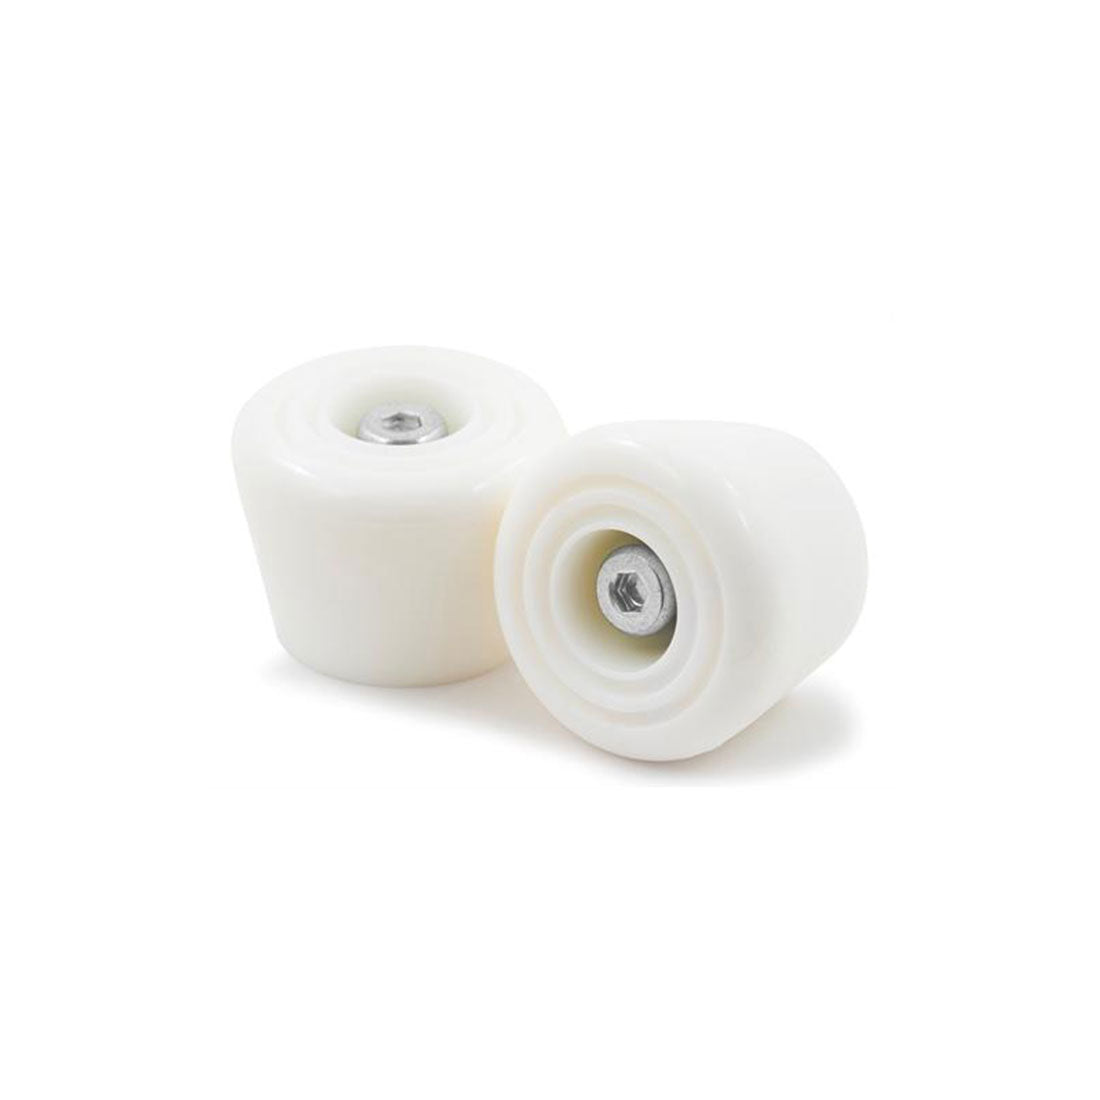 Rio Roller Toe Stops 2pk White Roller Skate Hardware and Parts